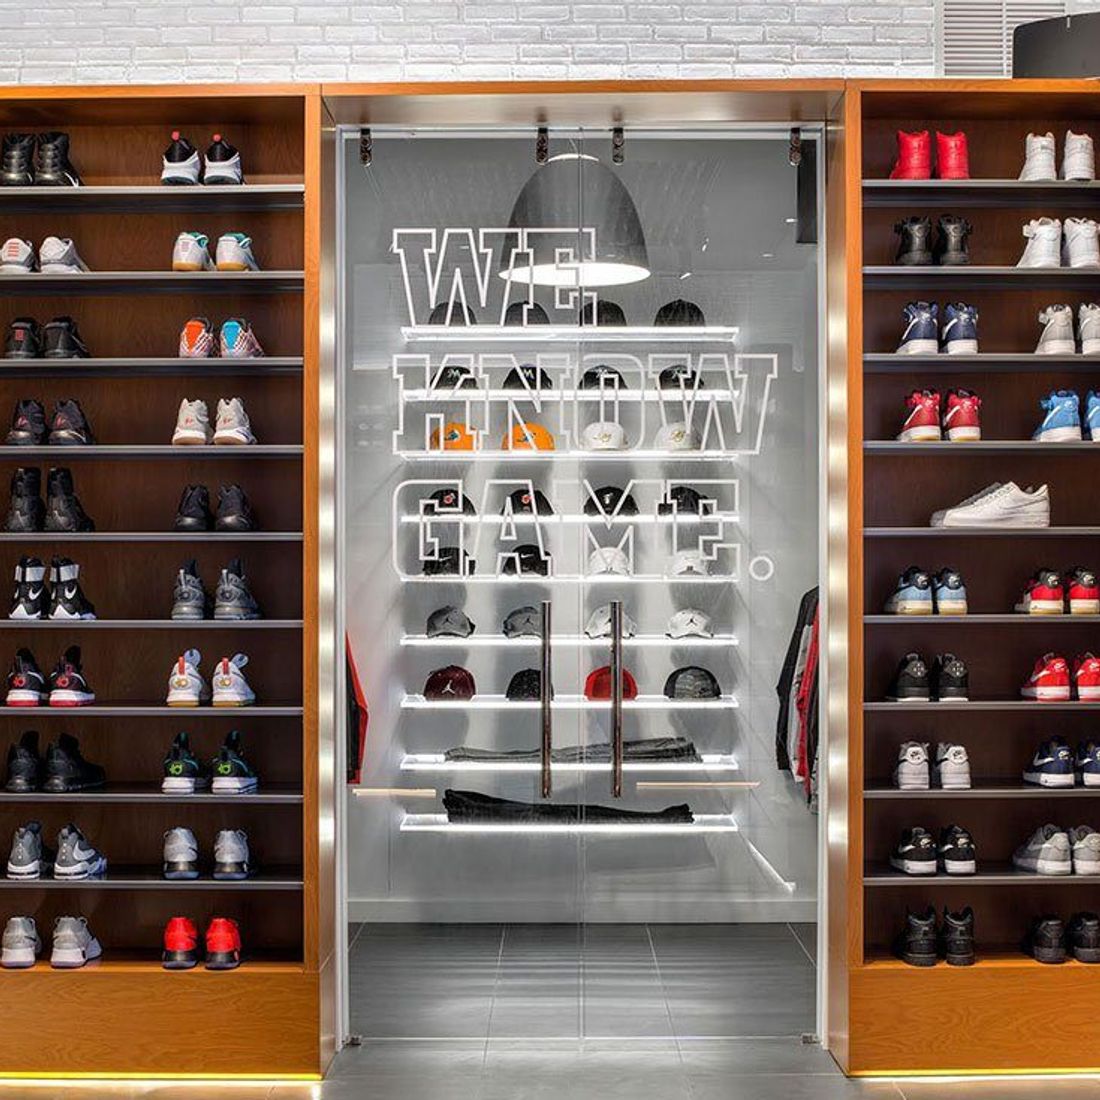 Take A Look Inside Dj Khaled's Personal Champs Sports Store